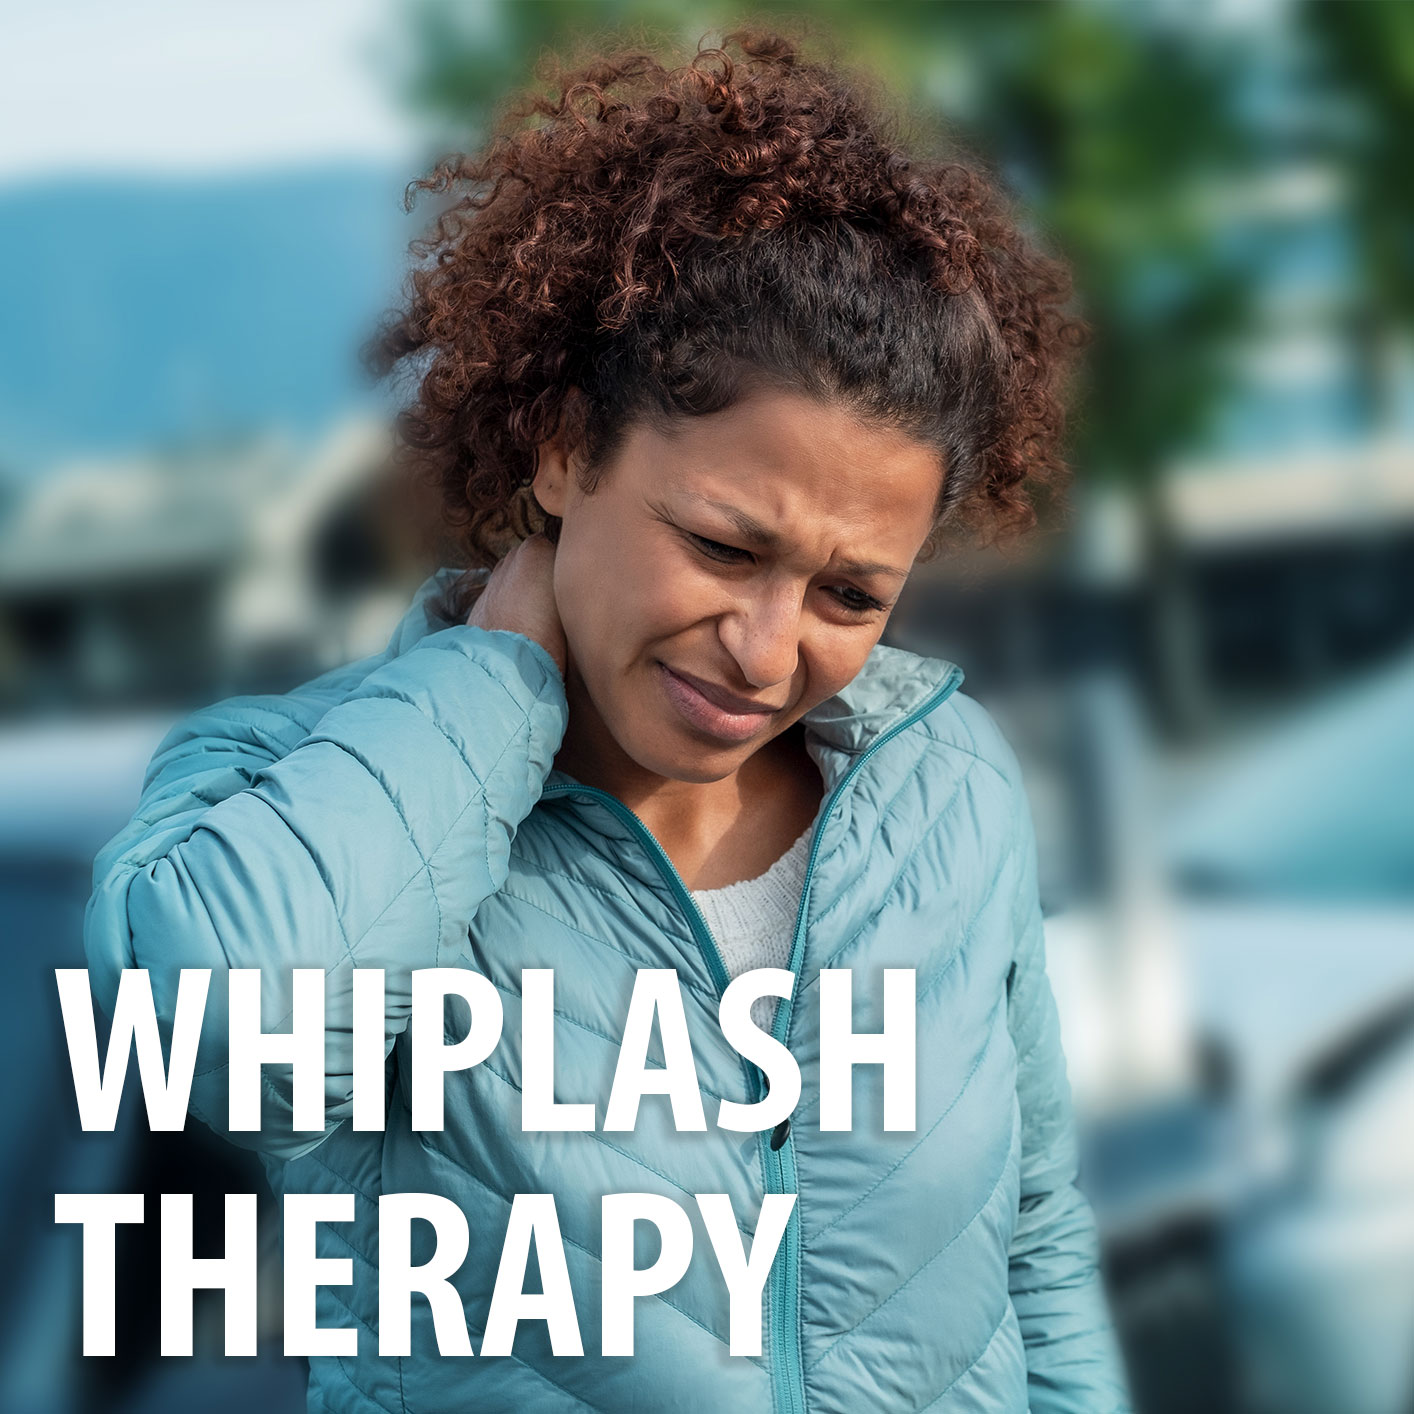 Person needing Whiplash Therapy after an accident